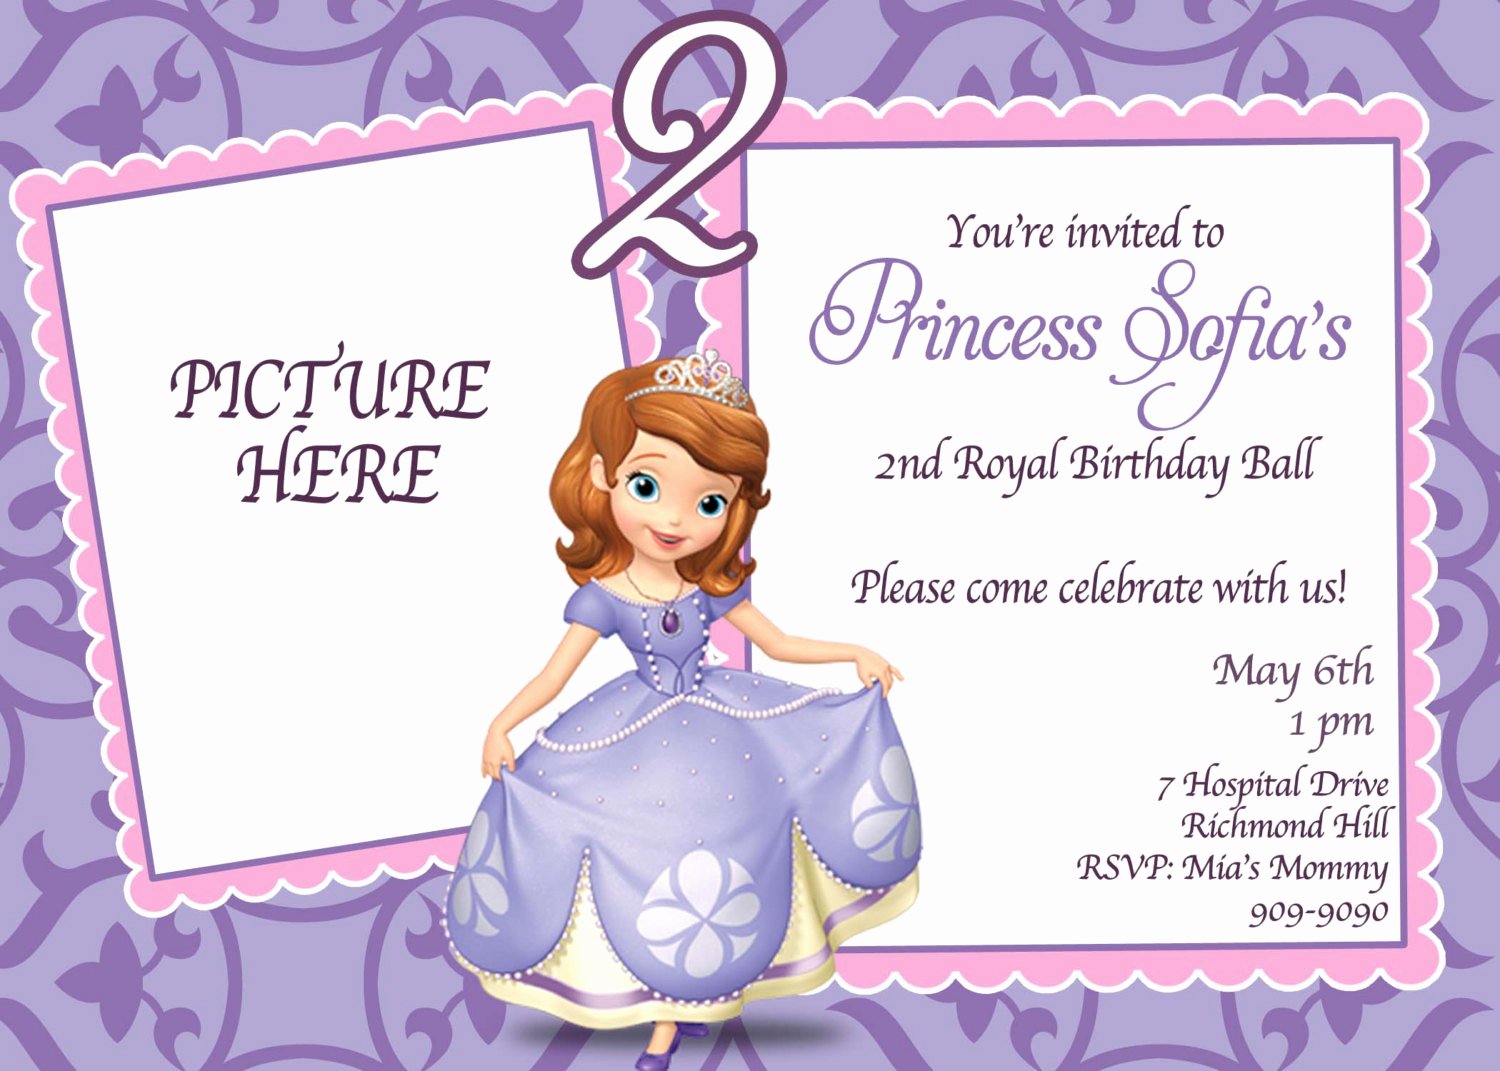 Sofia the First Invitation Templates Lovely Custom Photo Invitations sofia the First Birthday Invitation